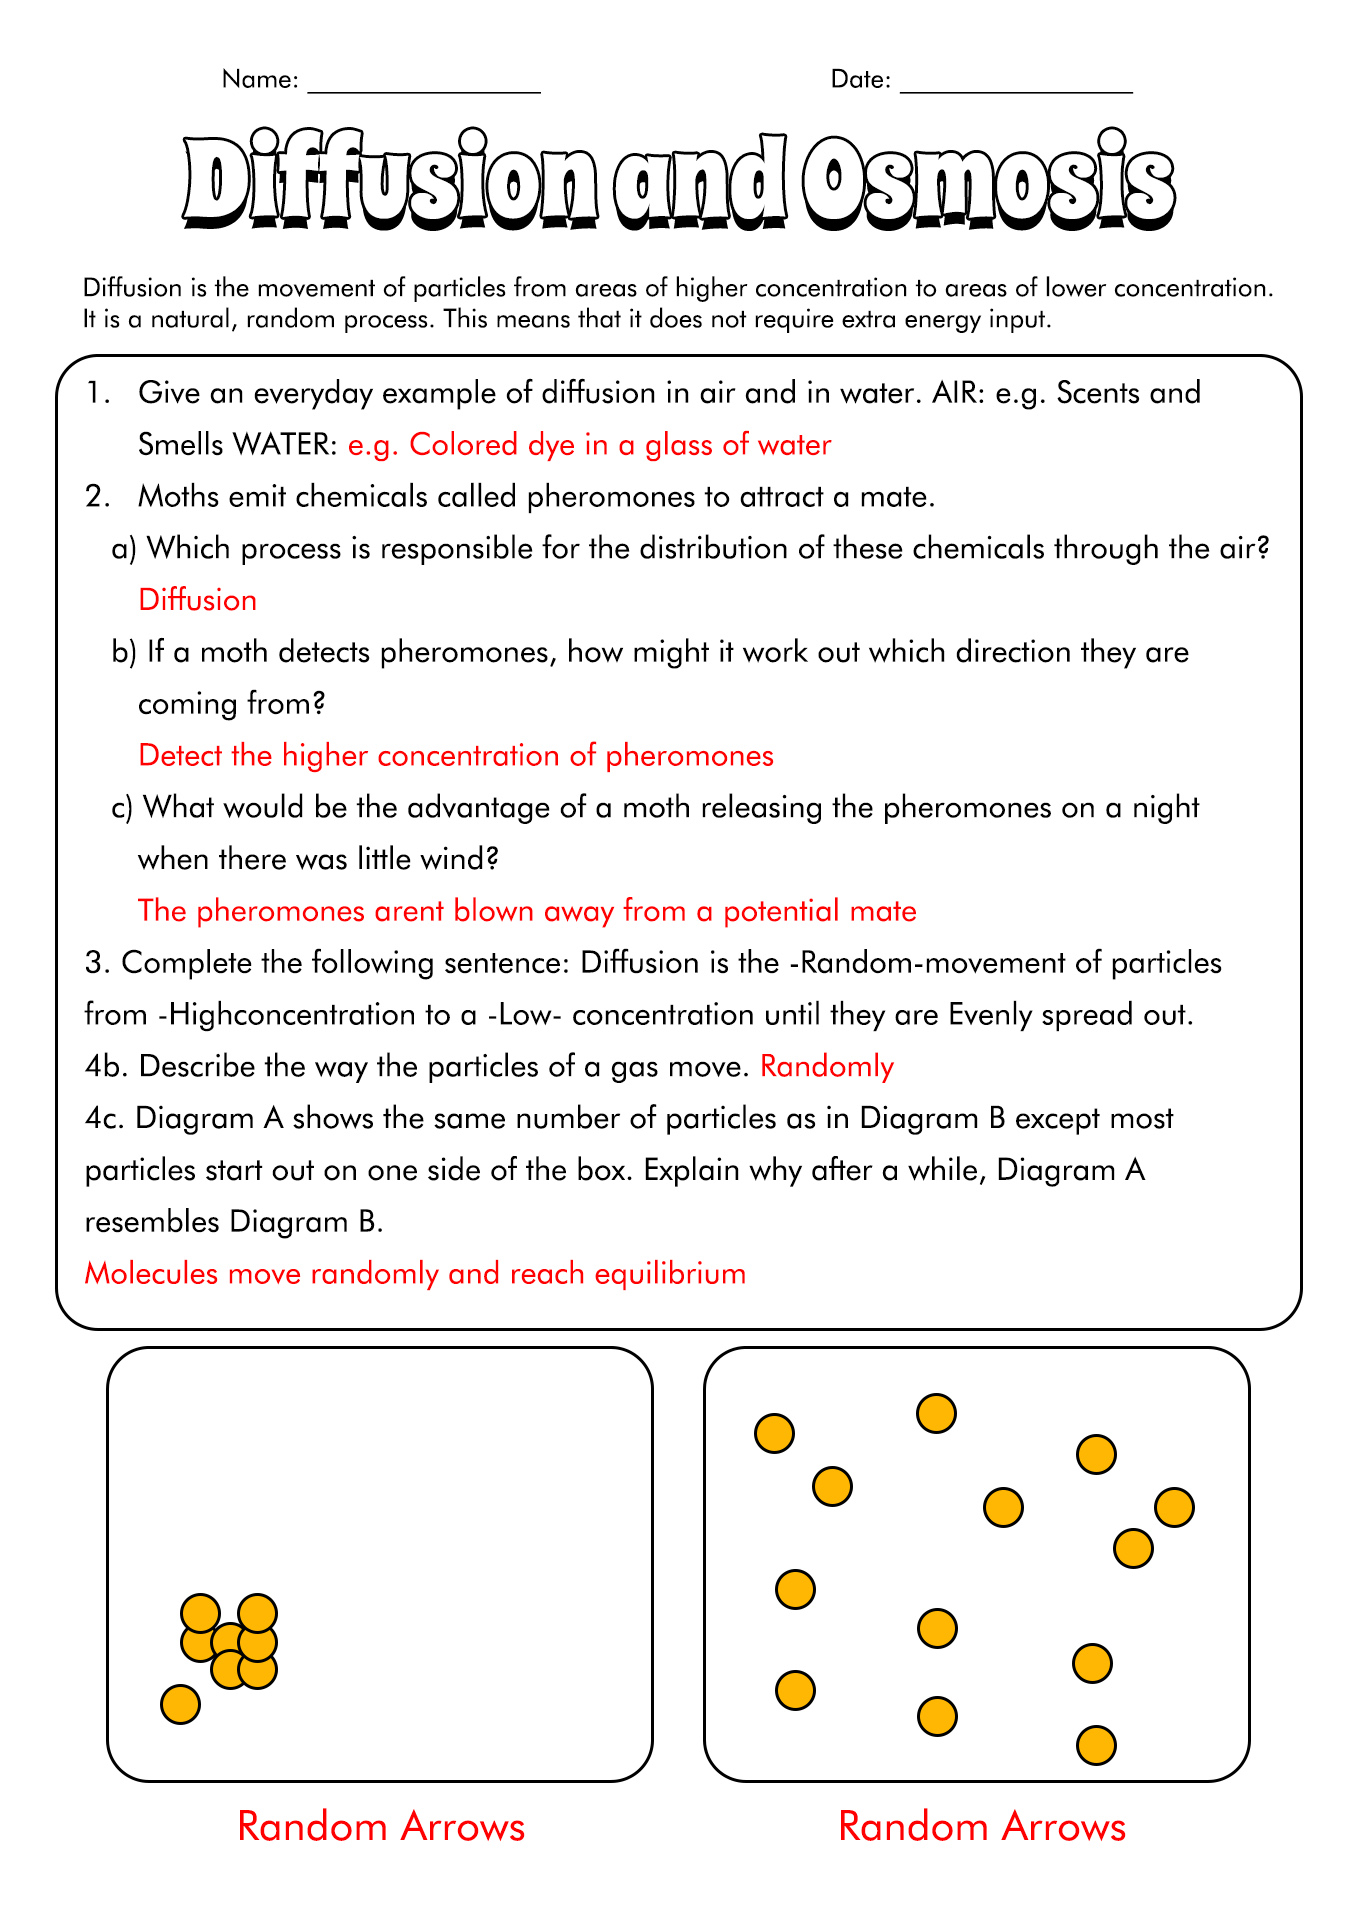 16 Best Images of Diffusion Osmosis Active Transport Worksheet  Cell Transport Diffusion and 